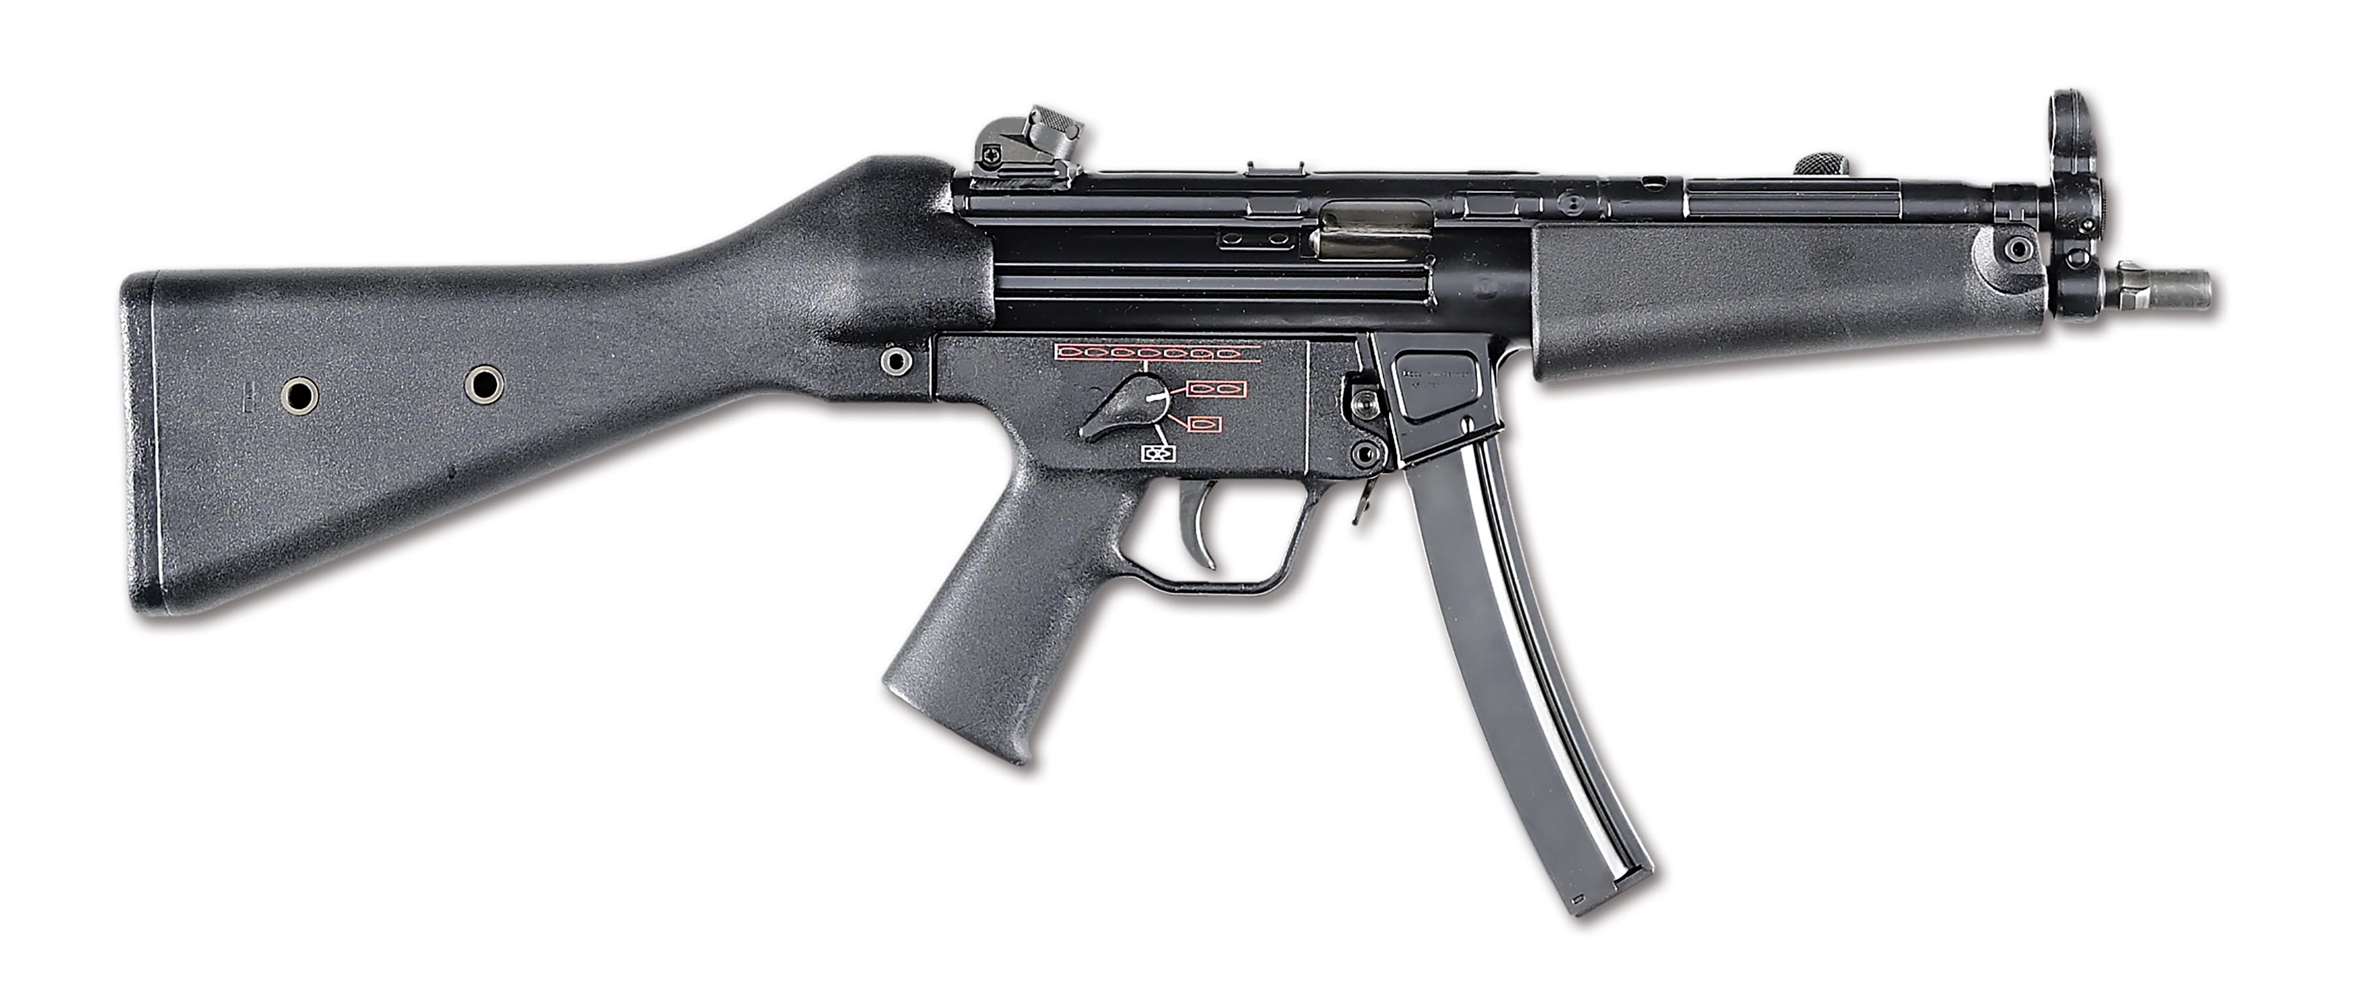 (N) SUPERB HIGH CONDITION FOUR POSITION SELECTOR FACTORY ORIGINAL FIXED STOCK HK MP5 MACHINE GUN (UNRESTRICTED - FULLY TRANSFERABLE).